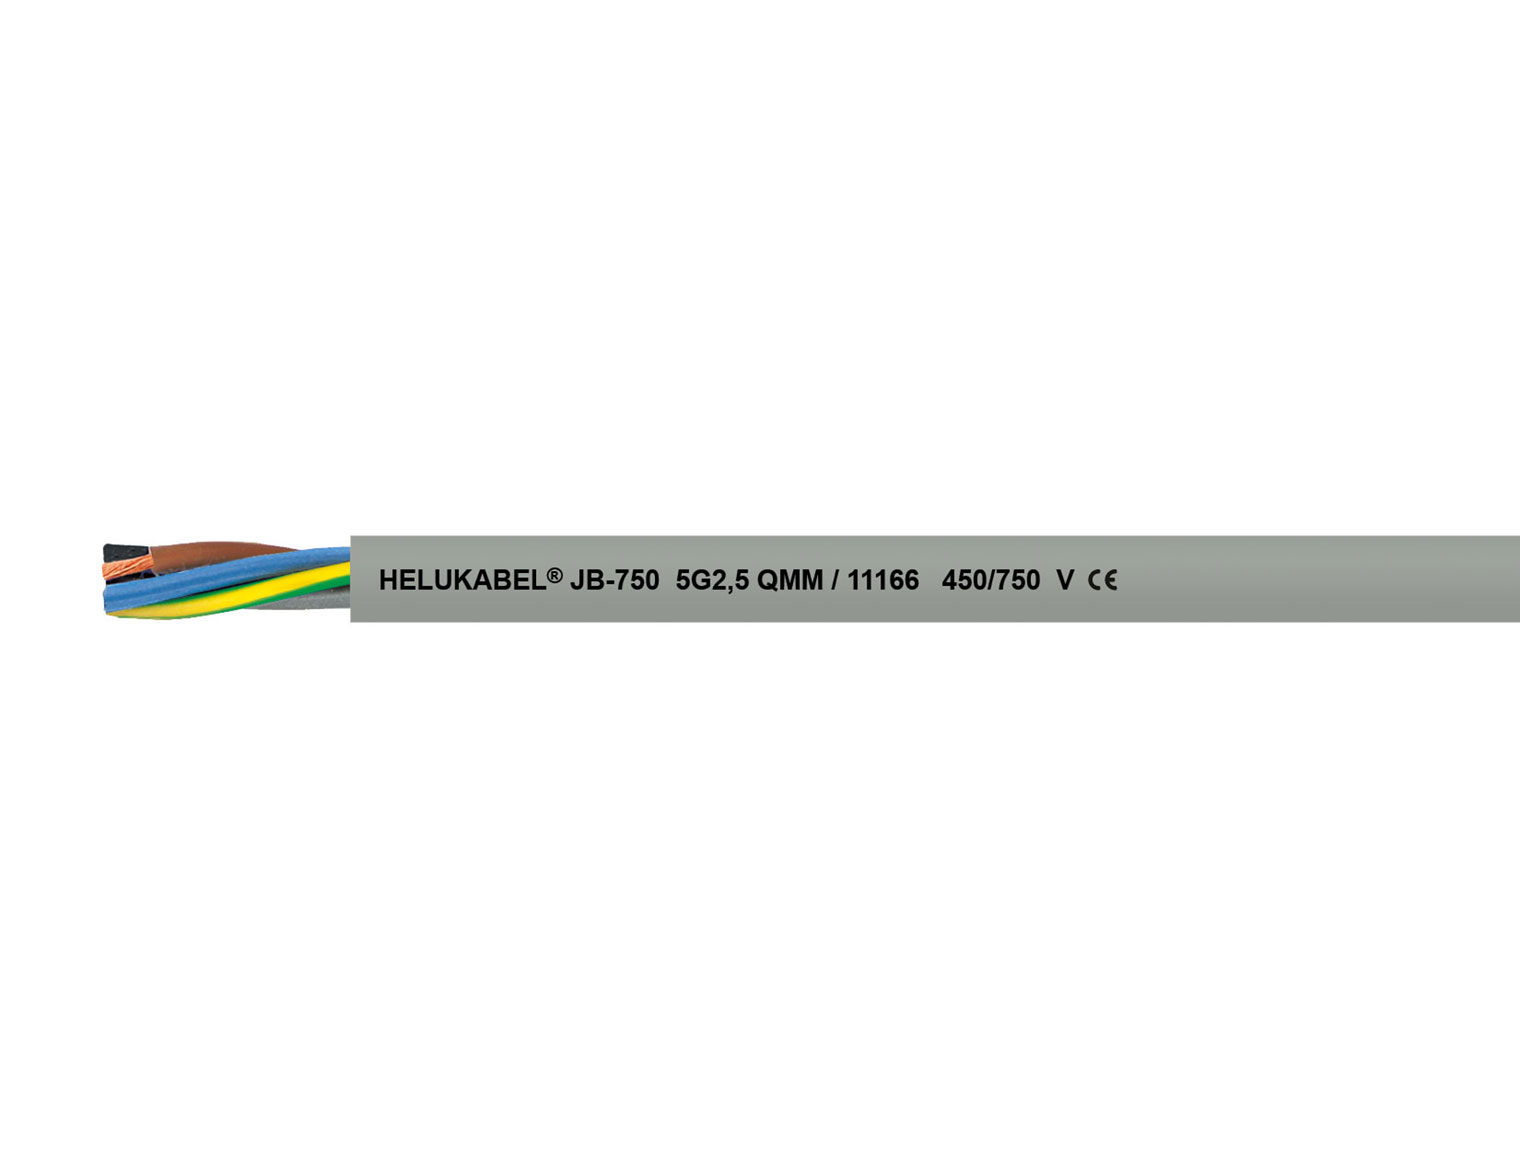 PVC control and connection cable, 450/750 V, colour coded, unscreened